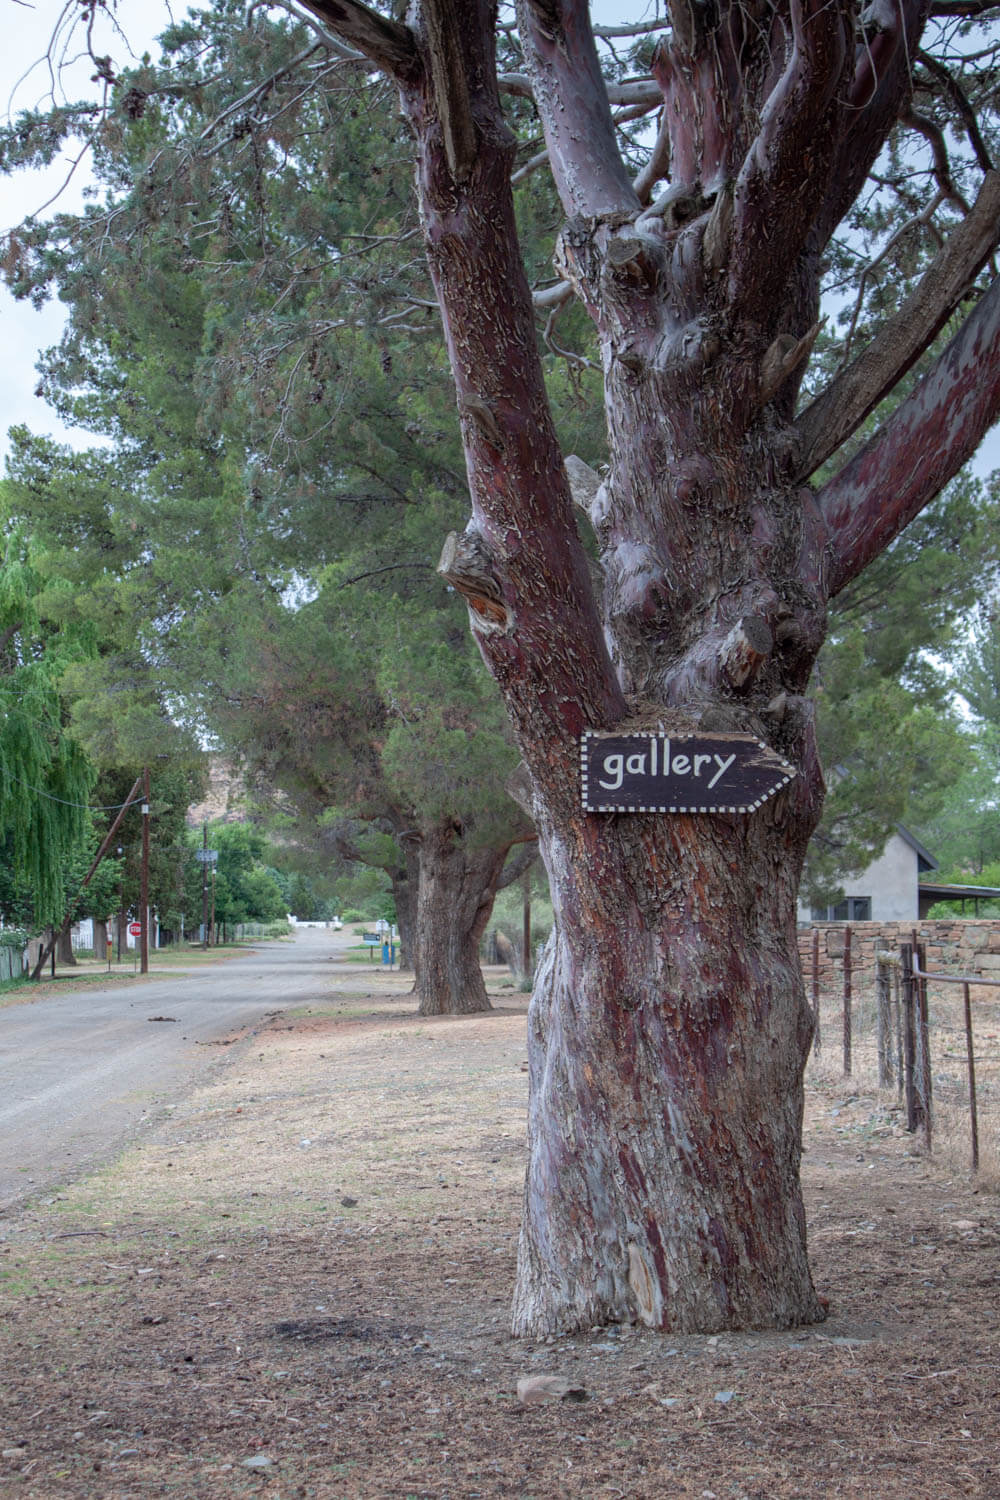 Tree with Gallery sign on street in Nieu Bethesda